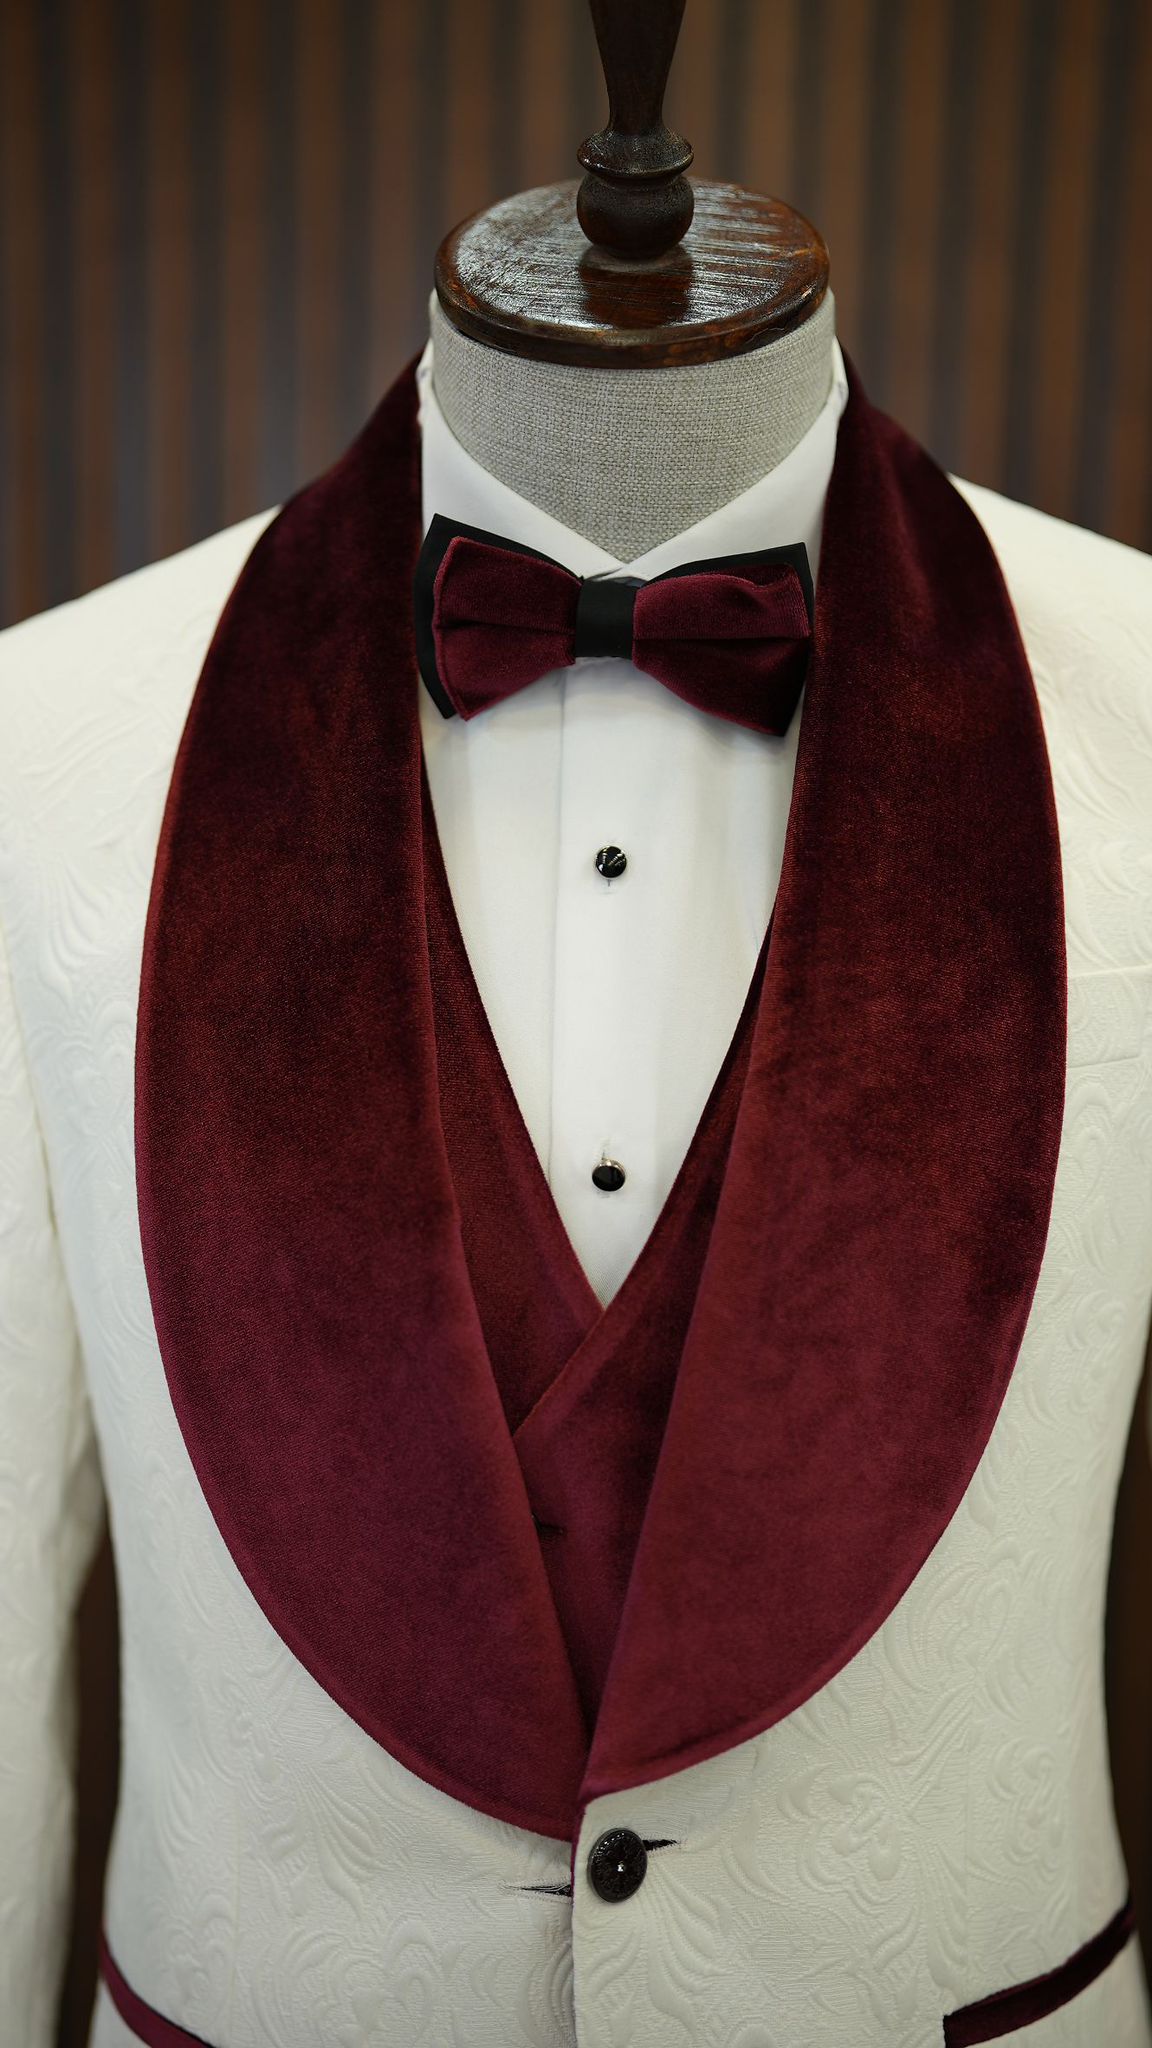 A Burgundy and White Tuxedo Suit on display.